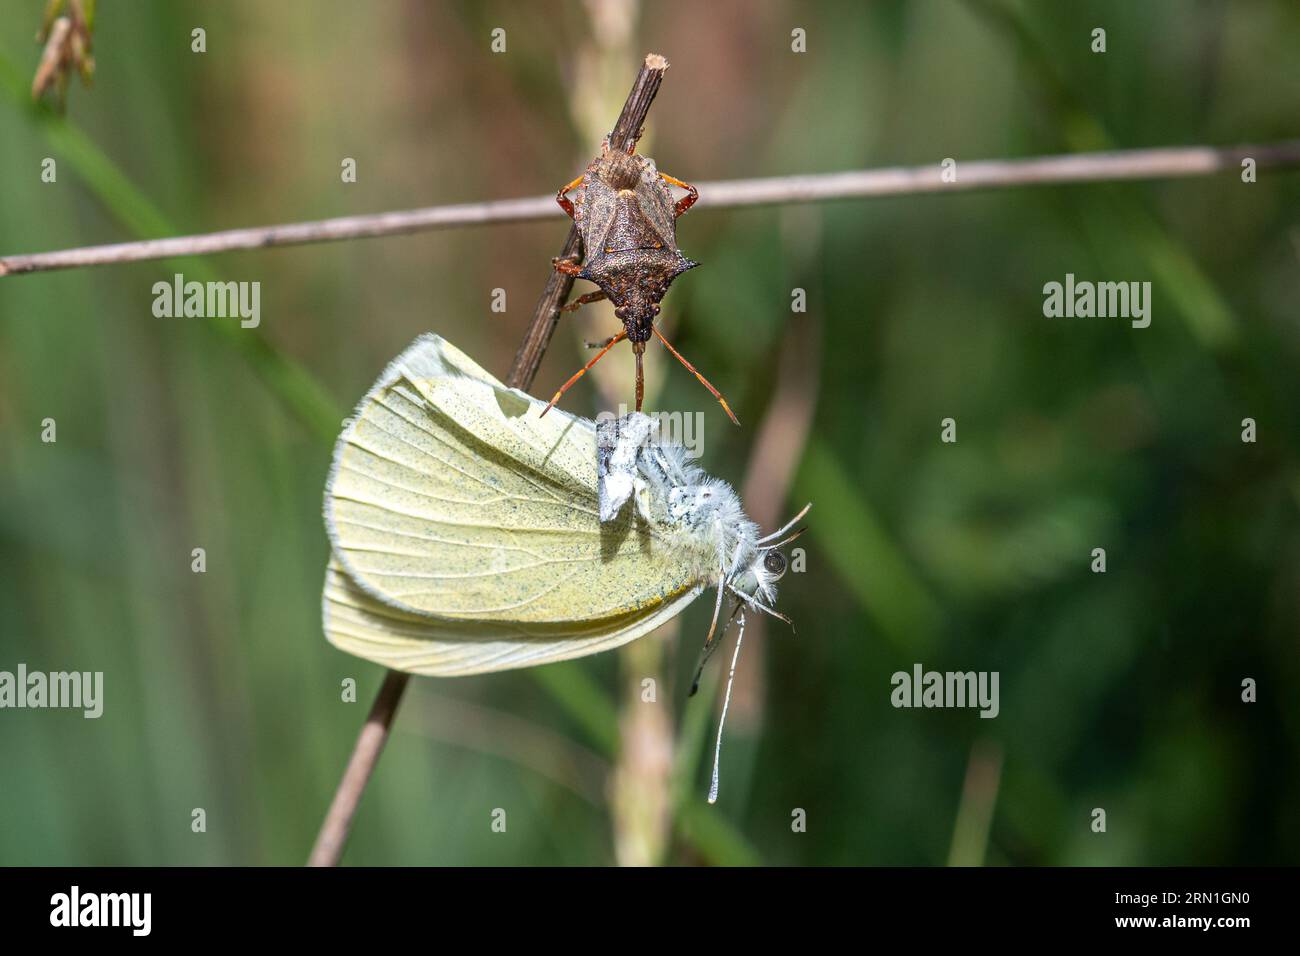 Spiked shieldbug (Picromerus bidens), a carnivorous species of shield bug in the family Pentatomidae, feeding on a small white butterfly, England, UK Stock Photo